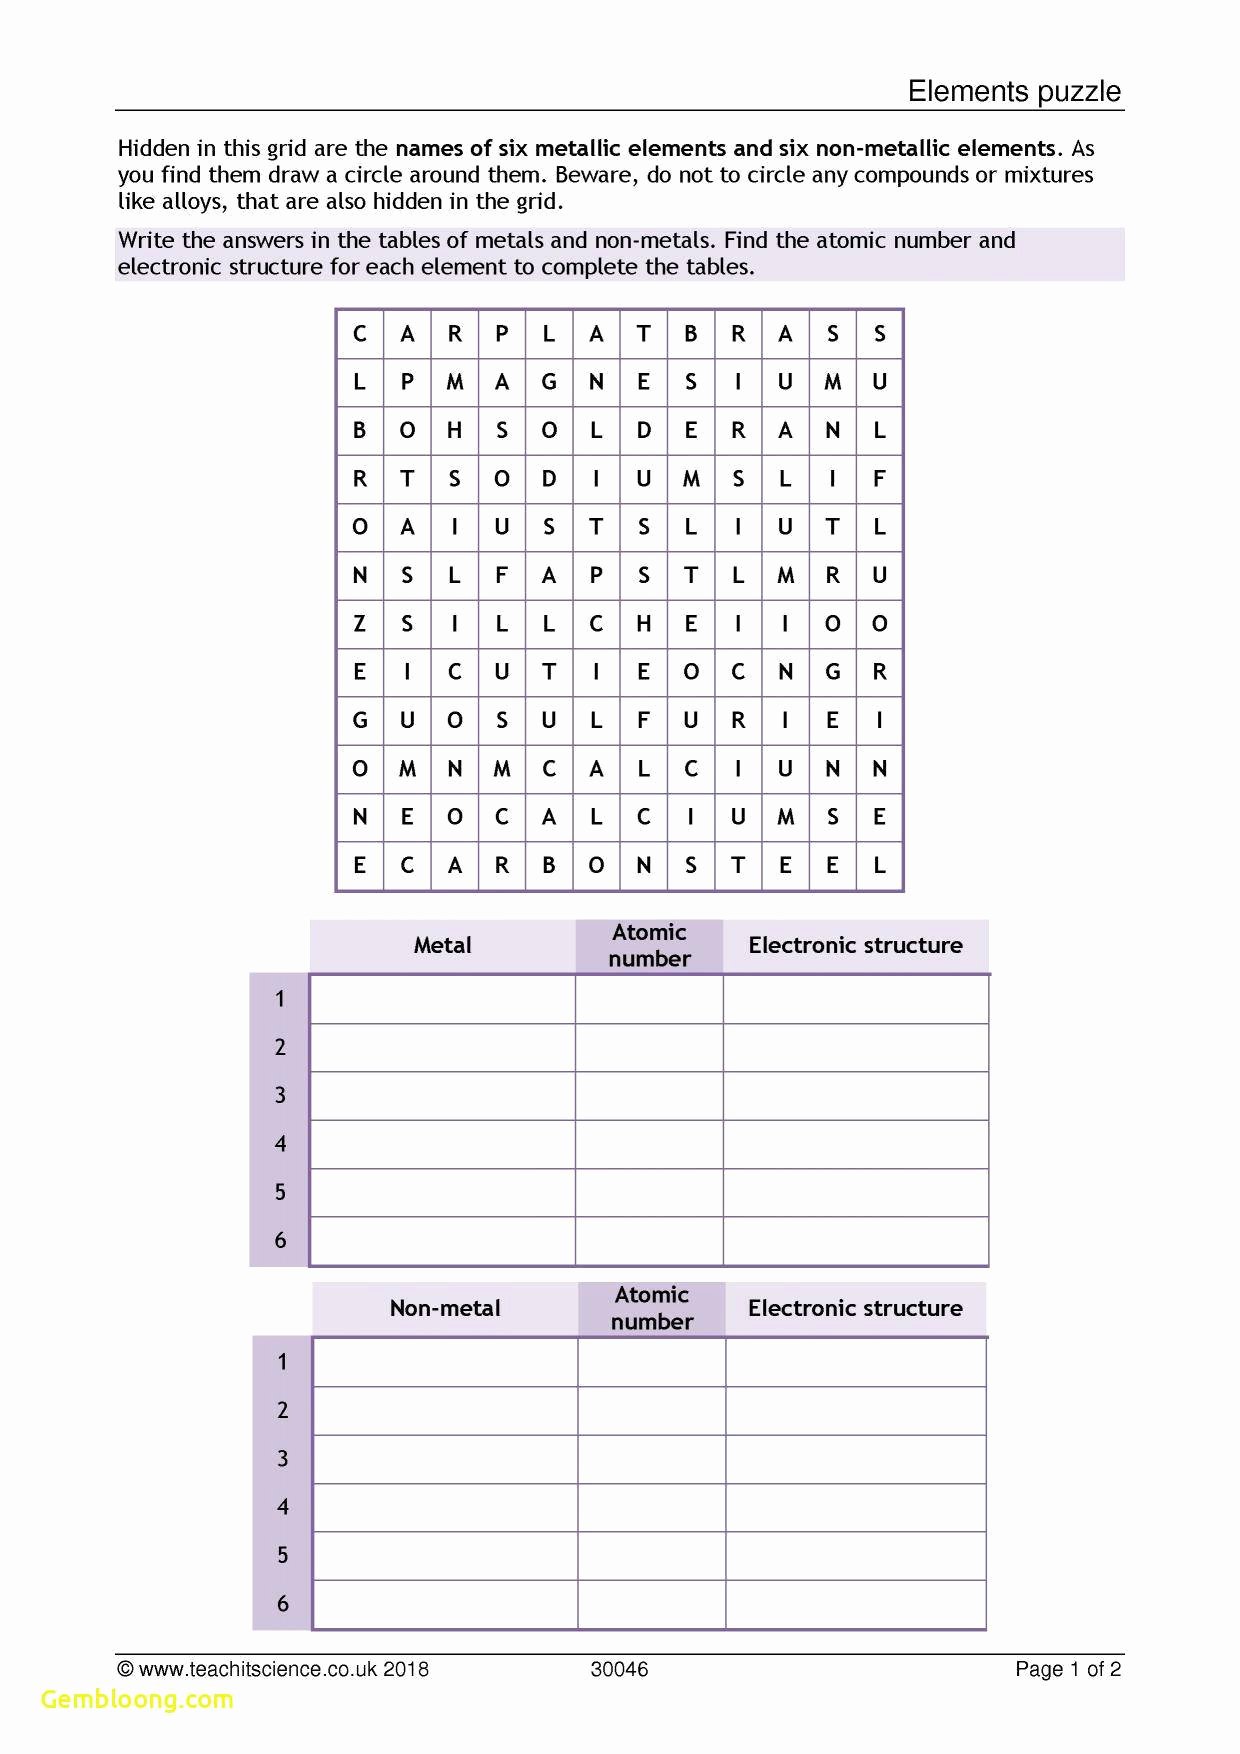 Sequence and Series Worksheet Lovely Sequences and Series Worksheet Answers Cramerforcongress